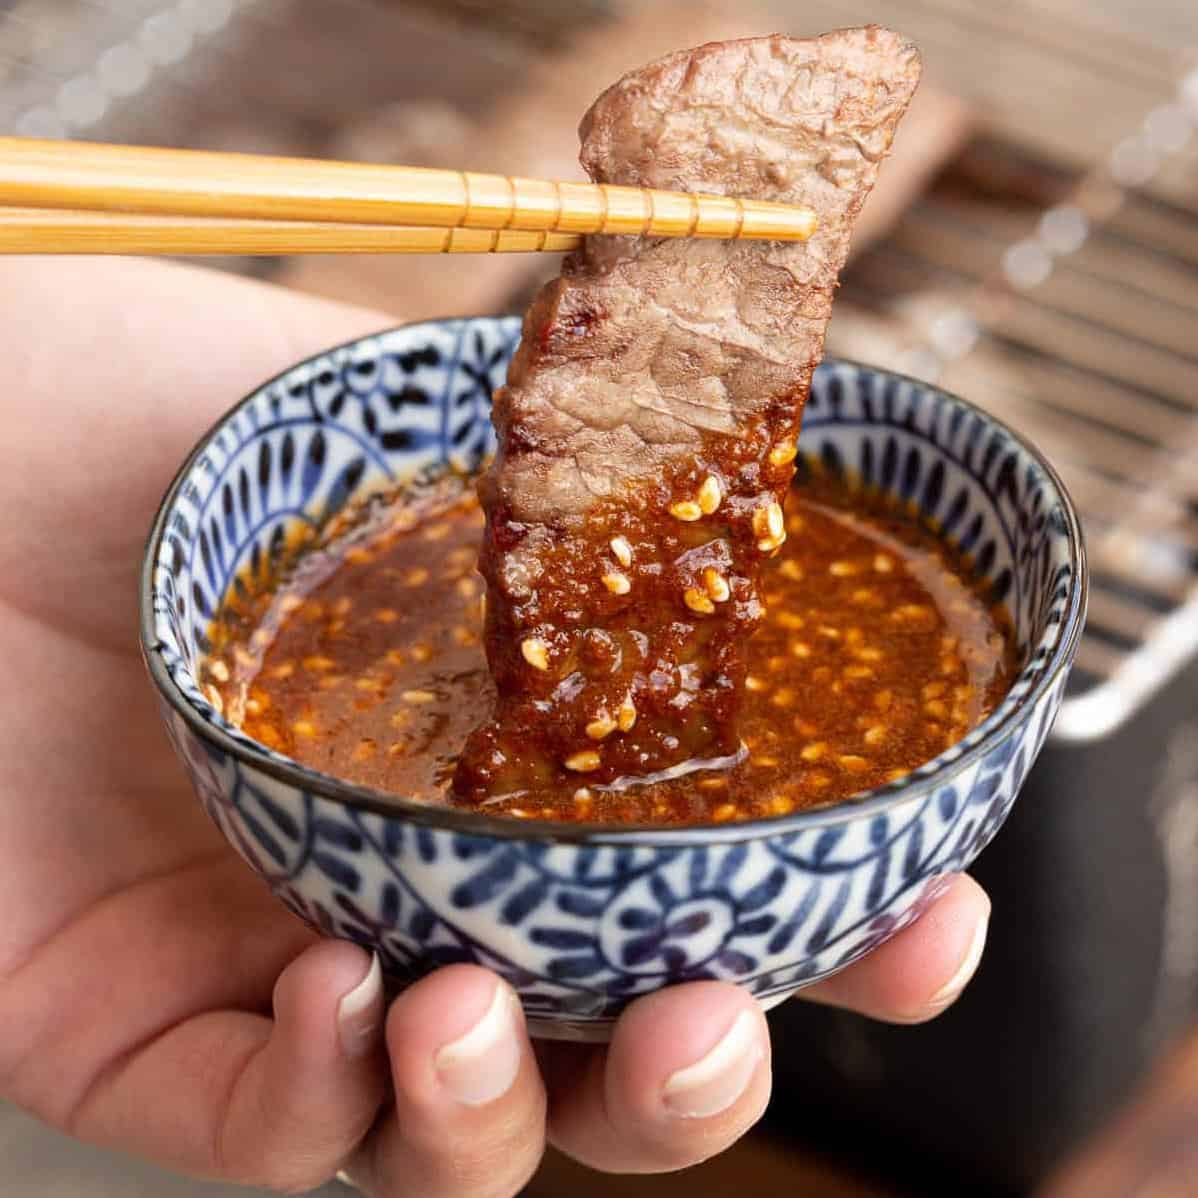  Let the umami flavors rain down with this savory and sweet Japanese BBQ sauce.